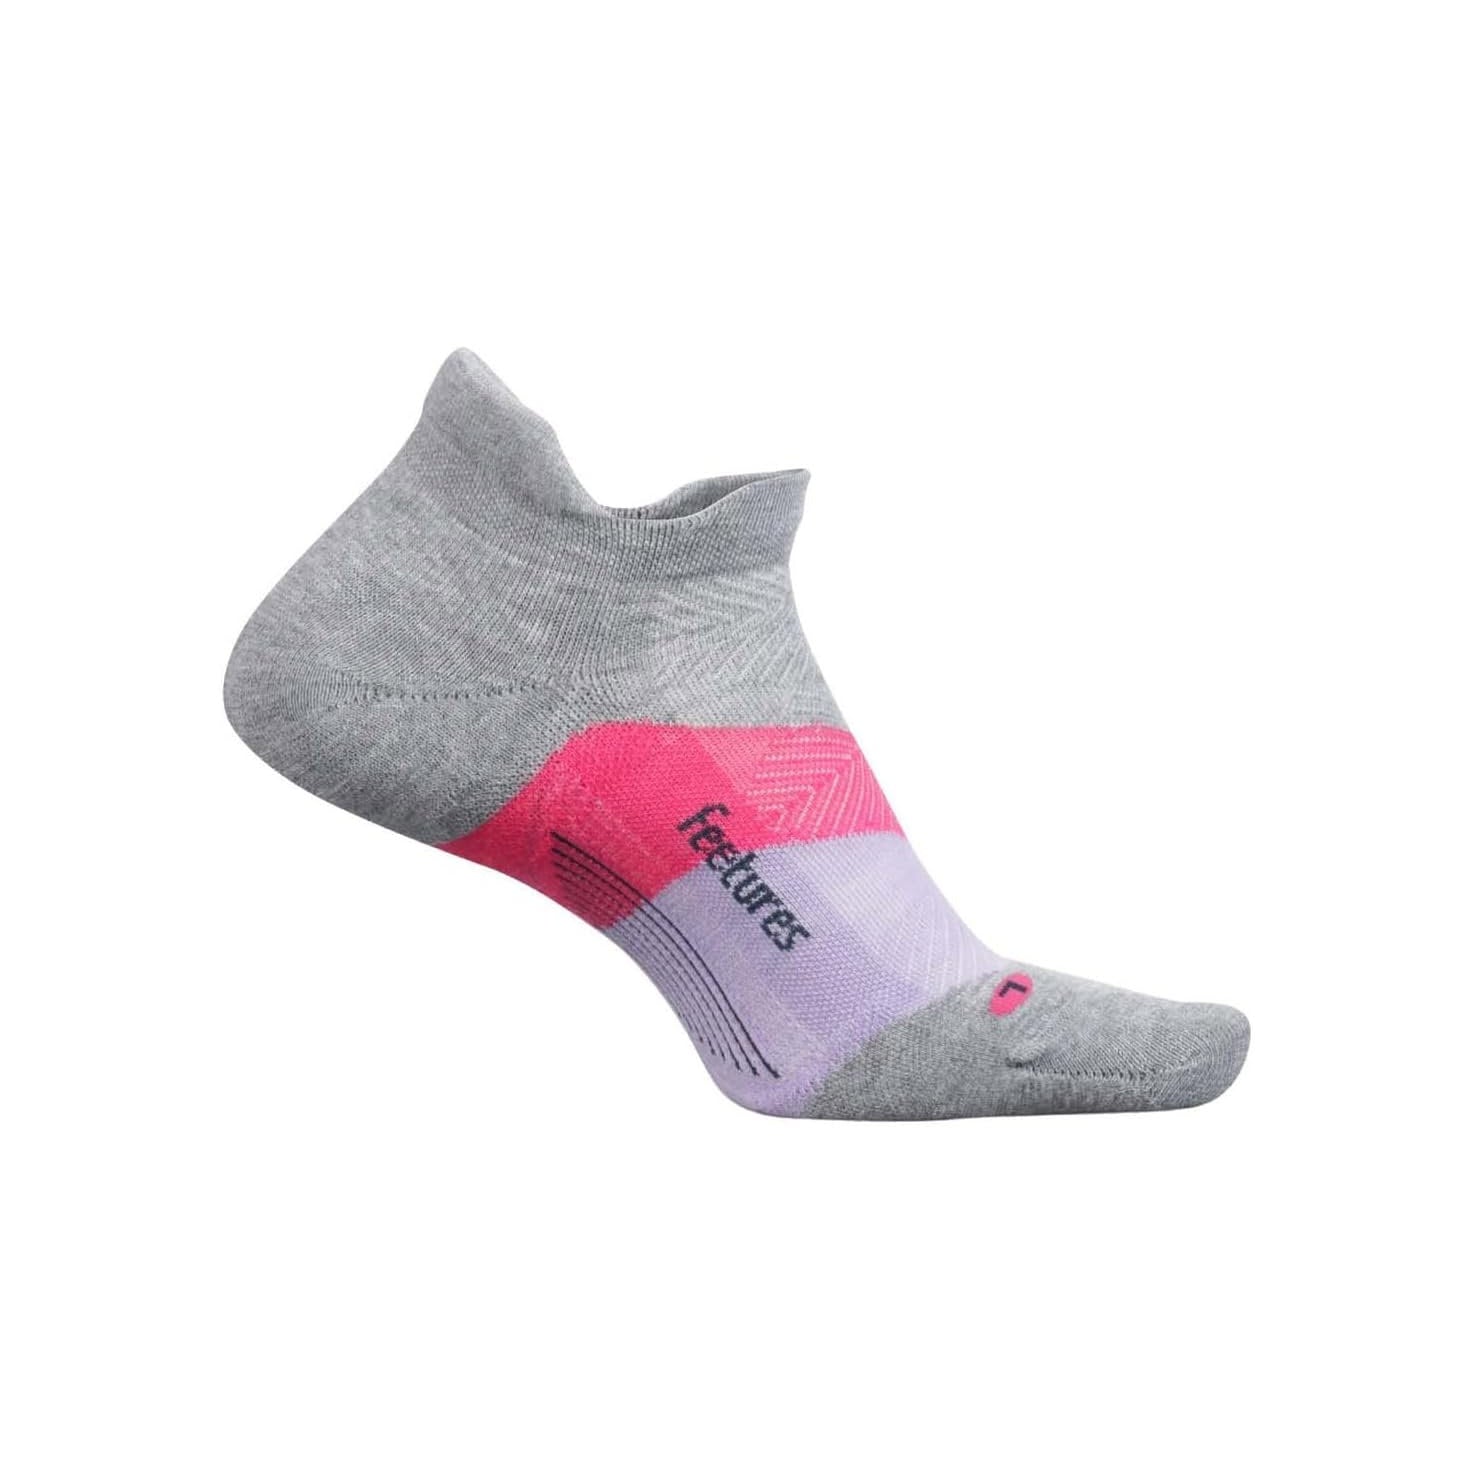 A single ELITE MAX CUSHION NO SHOW TAB GRADUAL GR sport sock featuring a grey body, pink gradient design on the foot, and the word "feature" in bold lettering with added arch support.